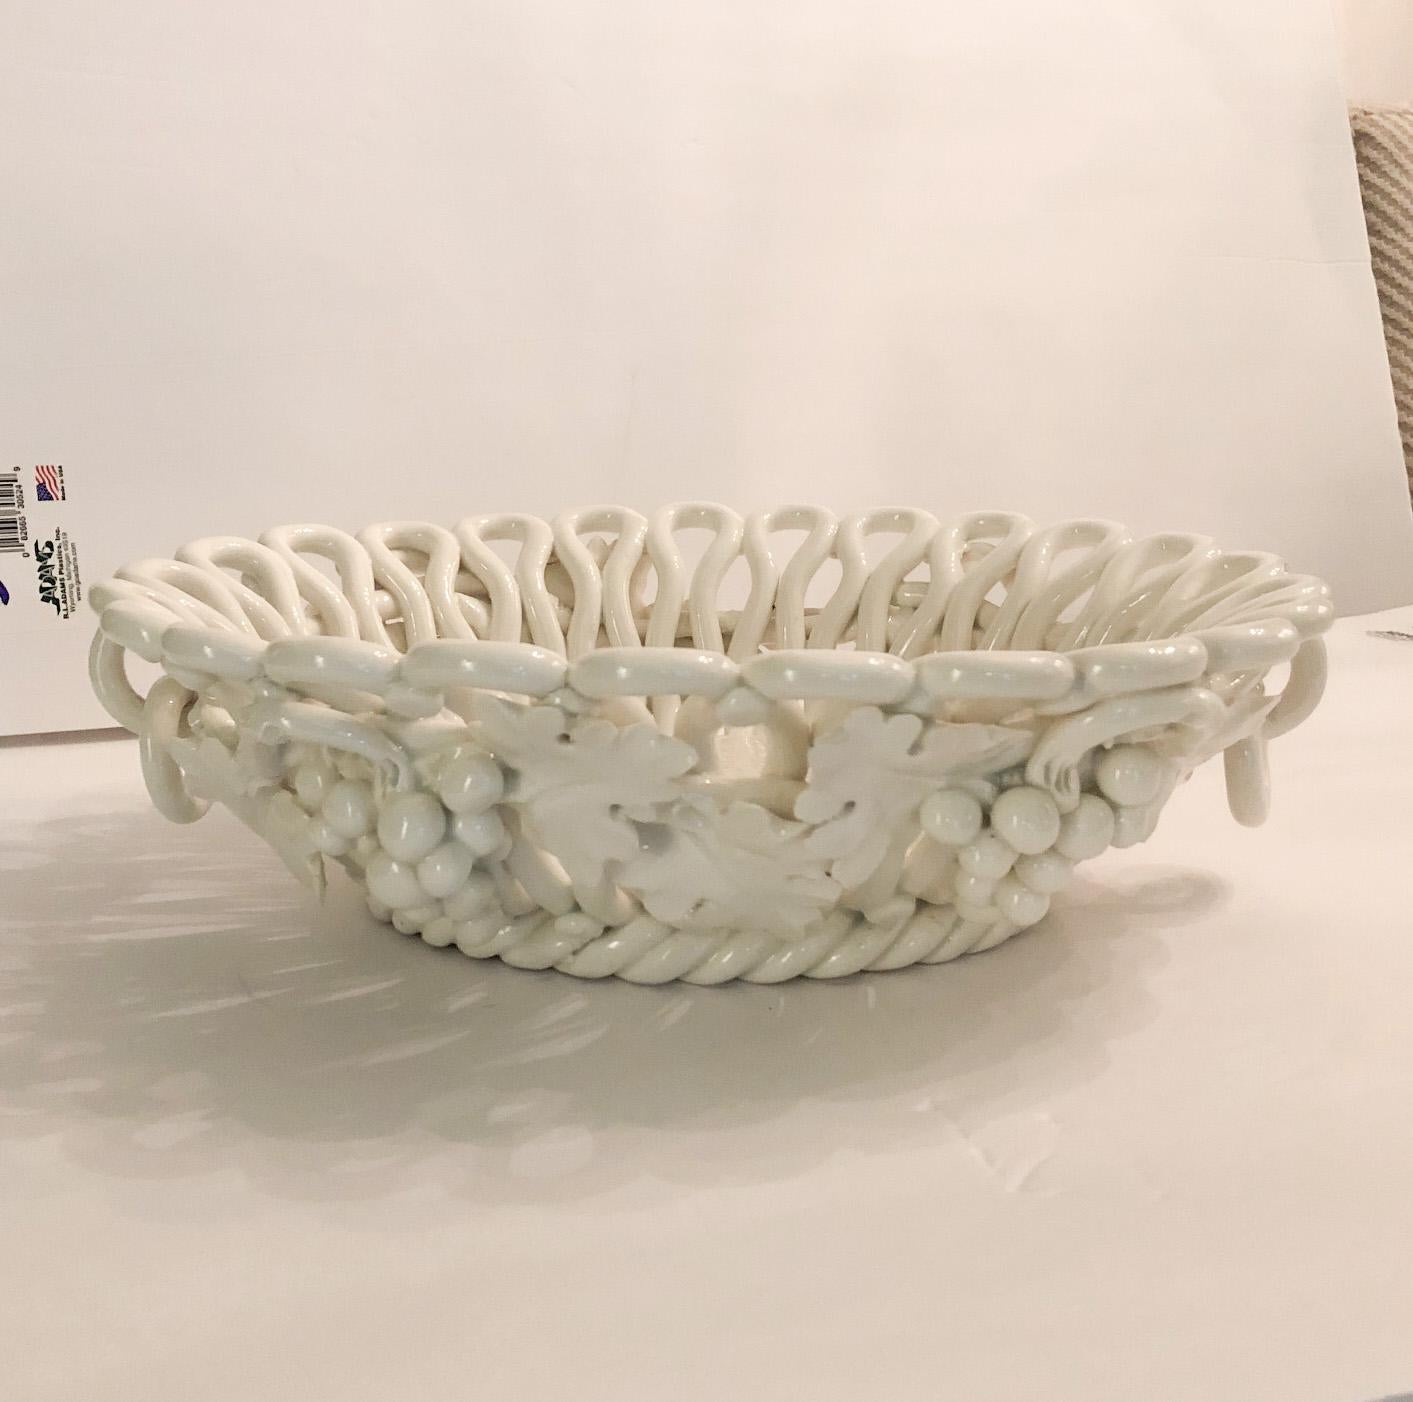 Wonderful large-scale cream ceramic bowl made in Italy. Note the door knocker-style handles which are intact. One grape leaf is broken but is barely visible given its location at top under the rim of the bowl. There is a factory glaze skip on the